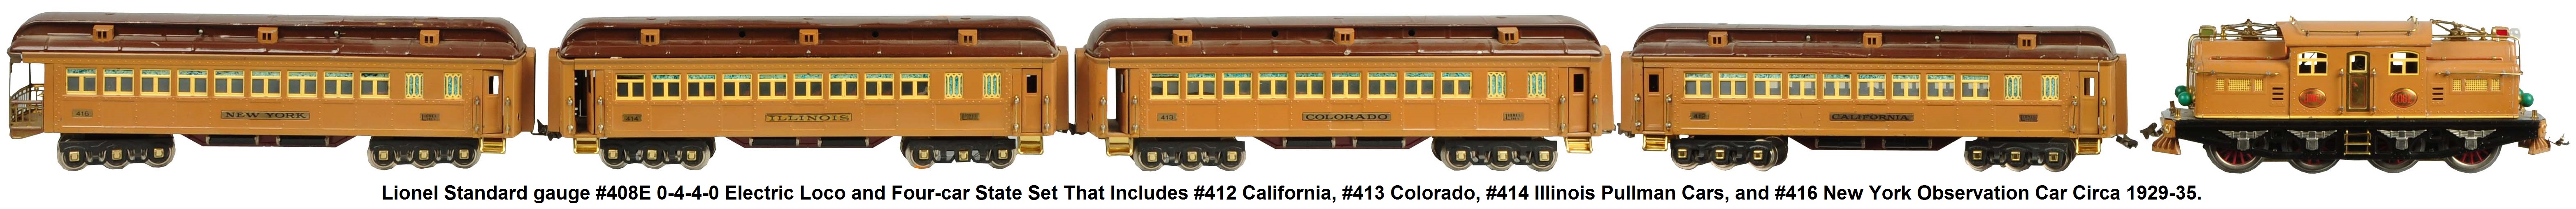 Lionel Standard gauge State Set from 1929-35 with #408E loco and four-car set that includes Illinois, Colorado, New York and California cars.